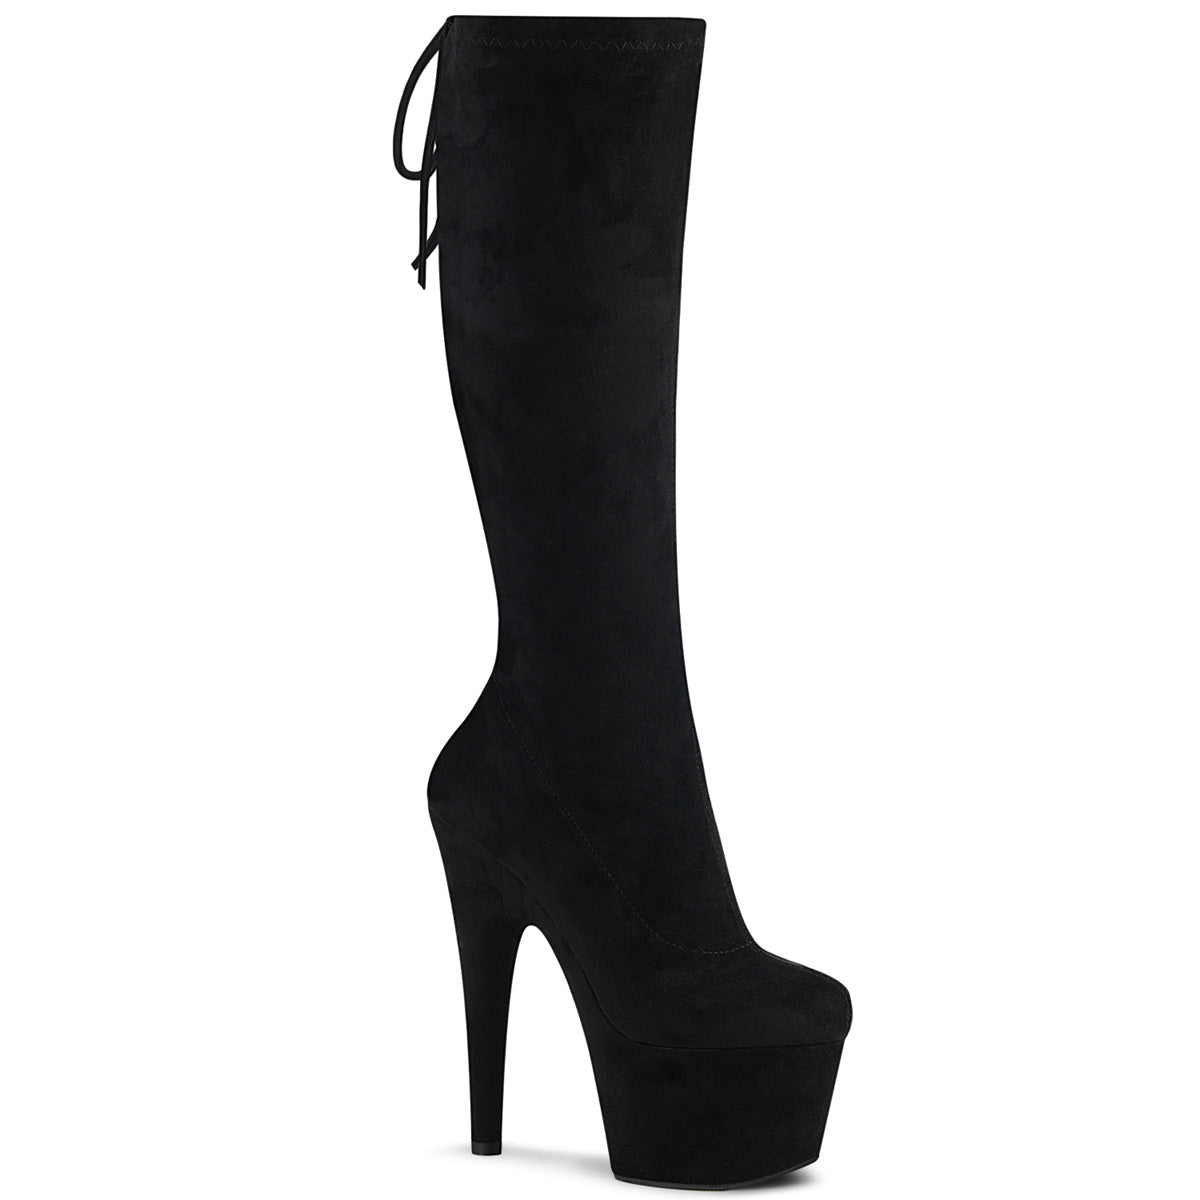 ADORE-2008 Pleaser Pole Dancing Shoes Knee High Boots Pleasers - Sexy Shoes